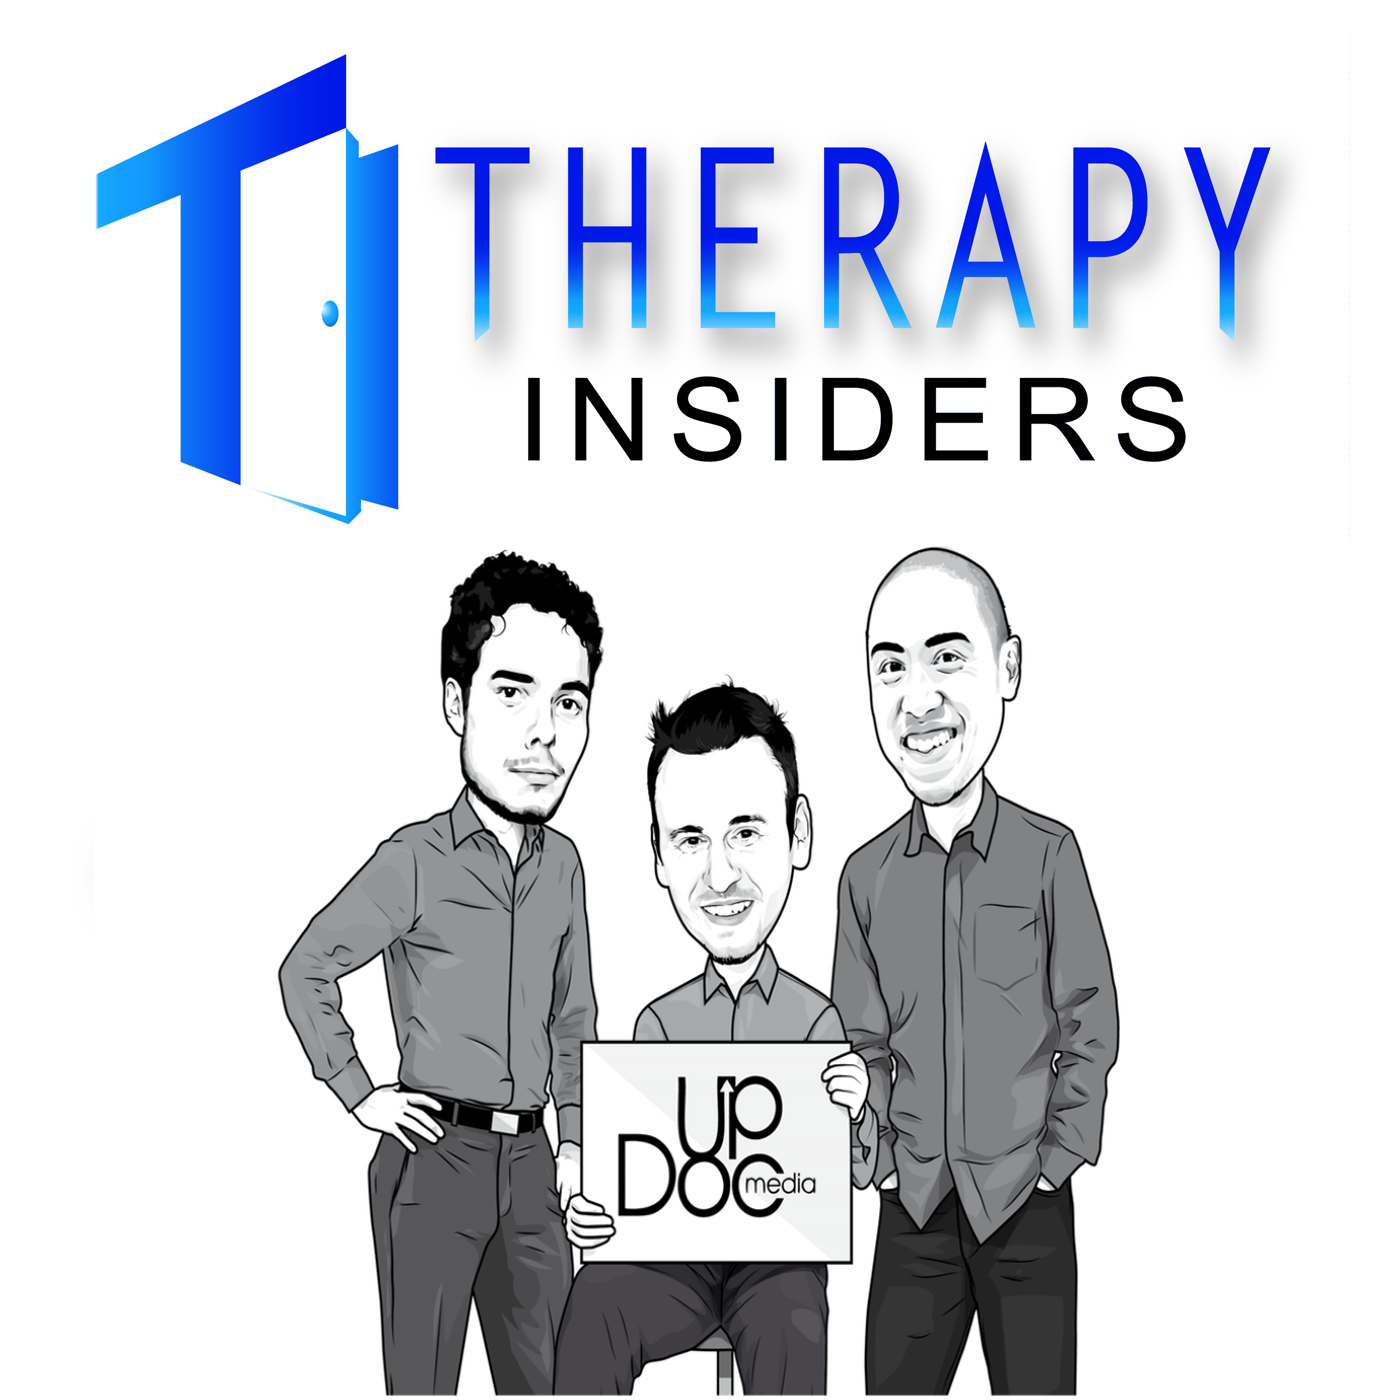 physical therapy podcast